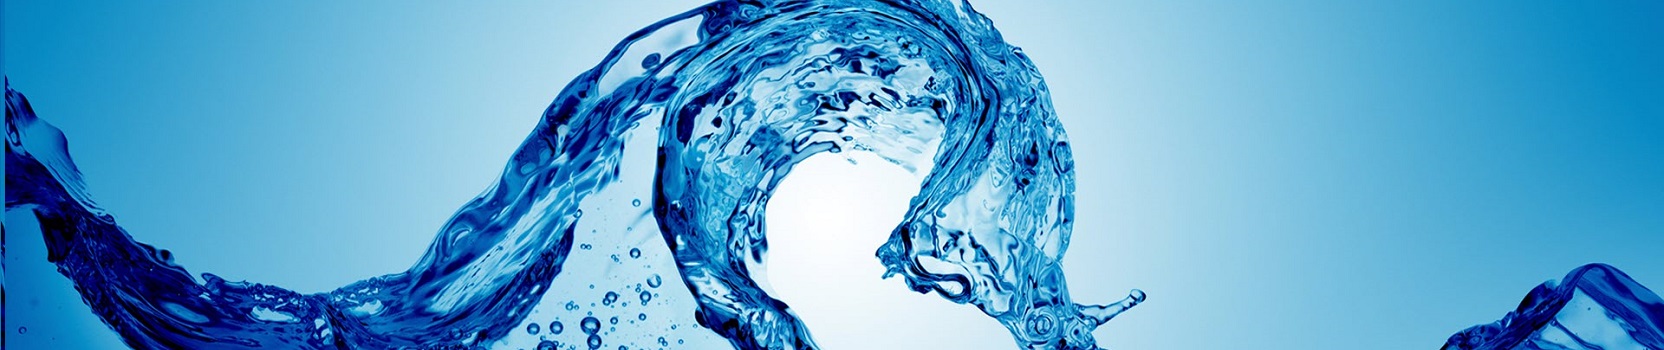 blue_wave_of_water-wide-1